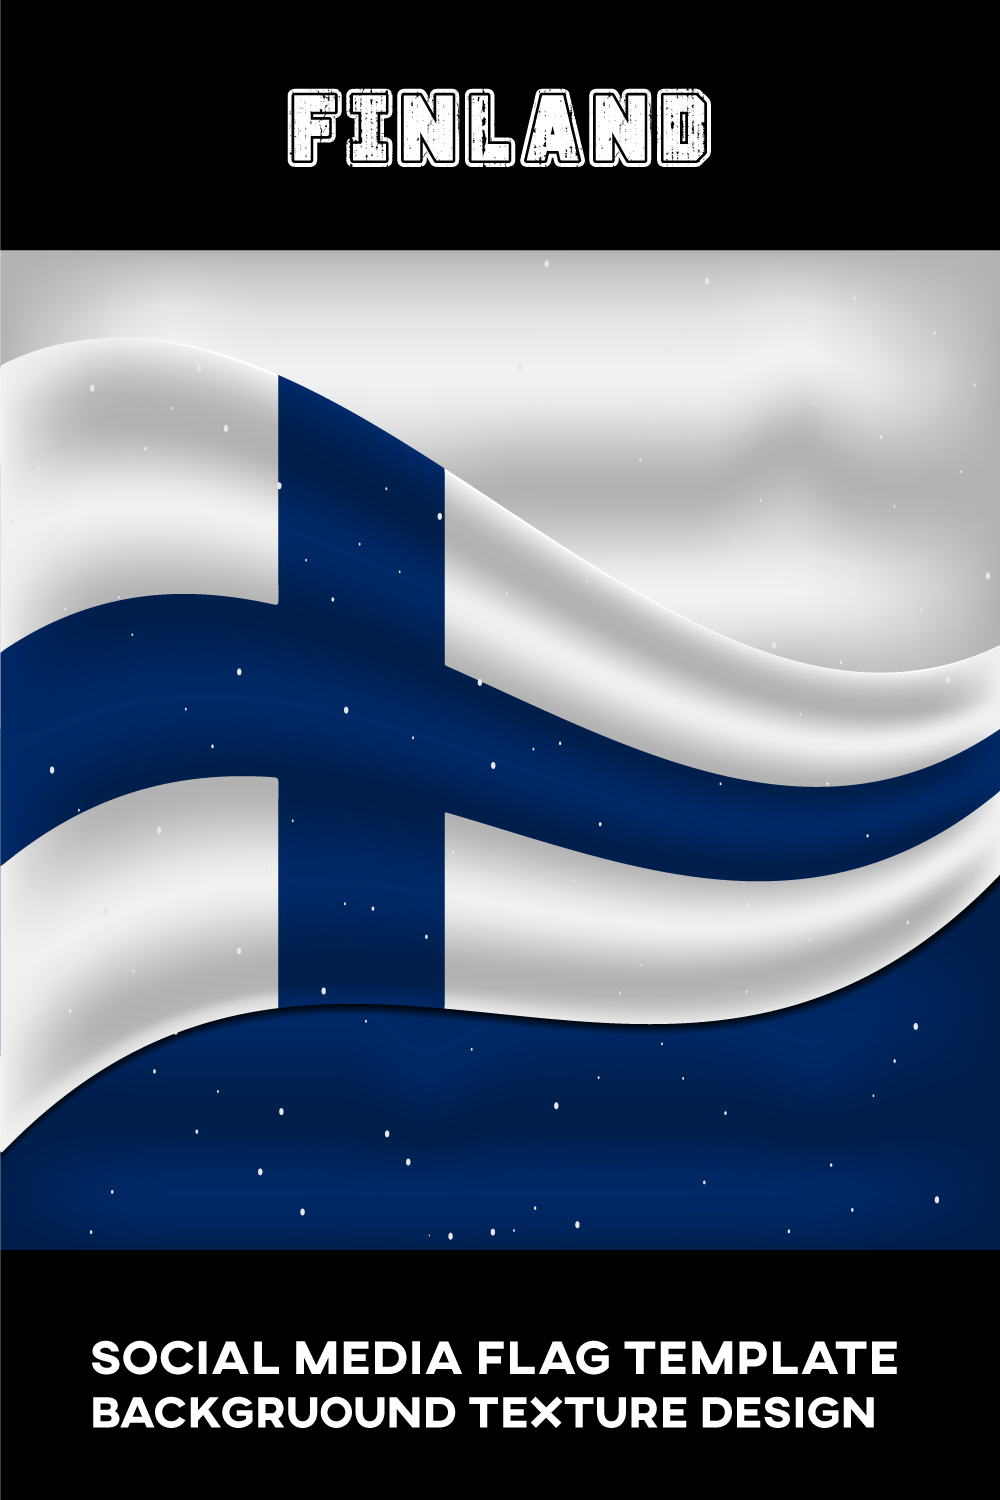 Colorful image of the flag of Finland.